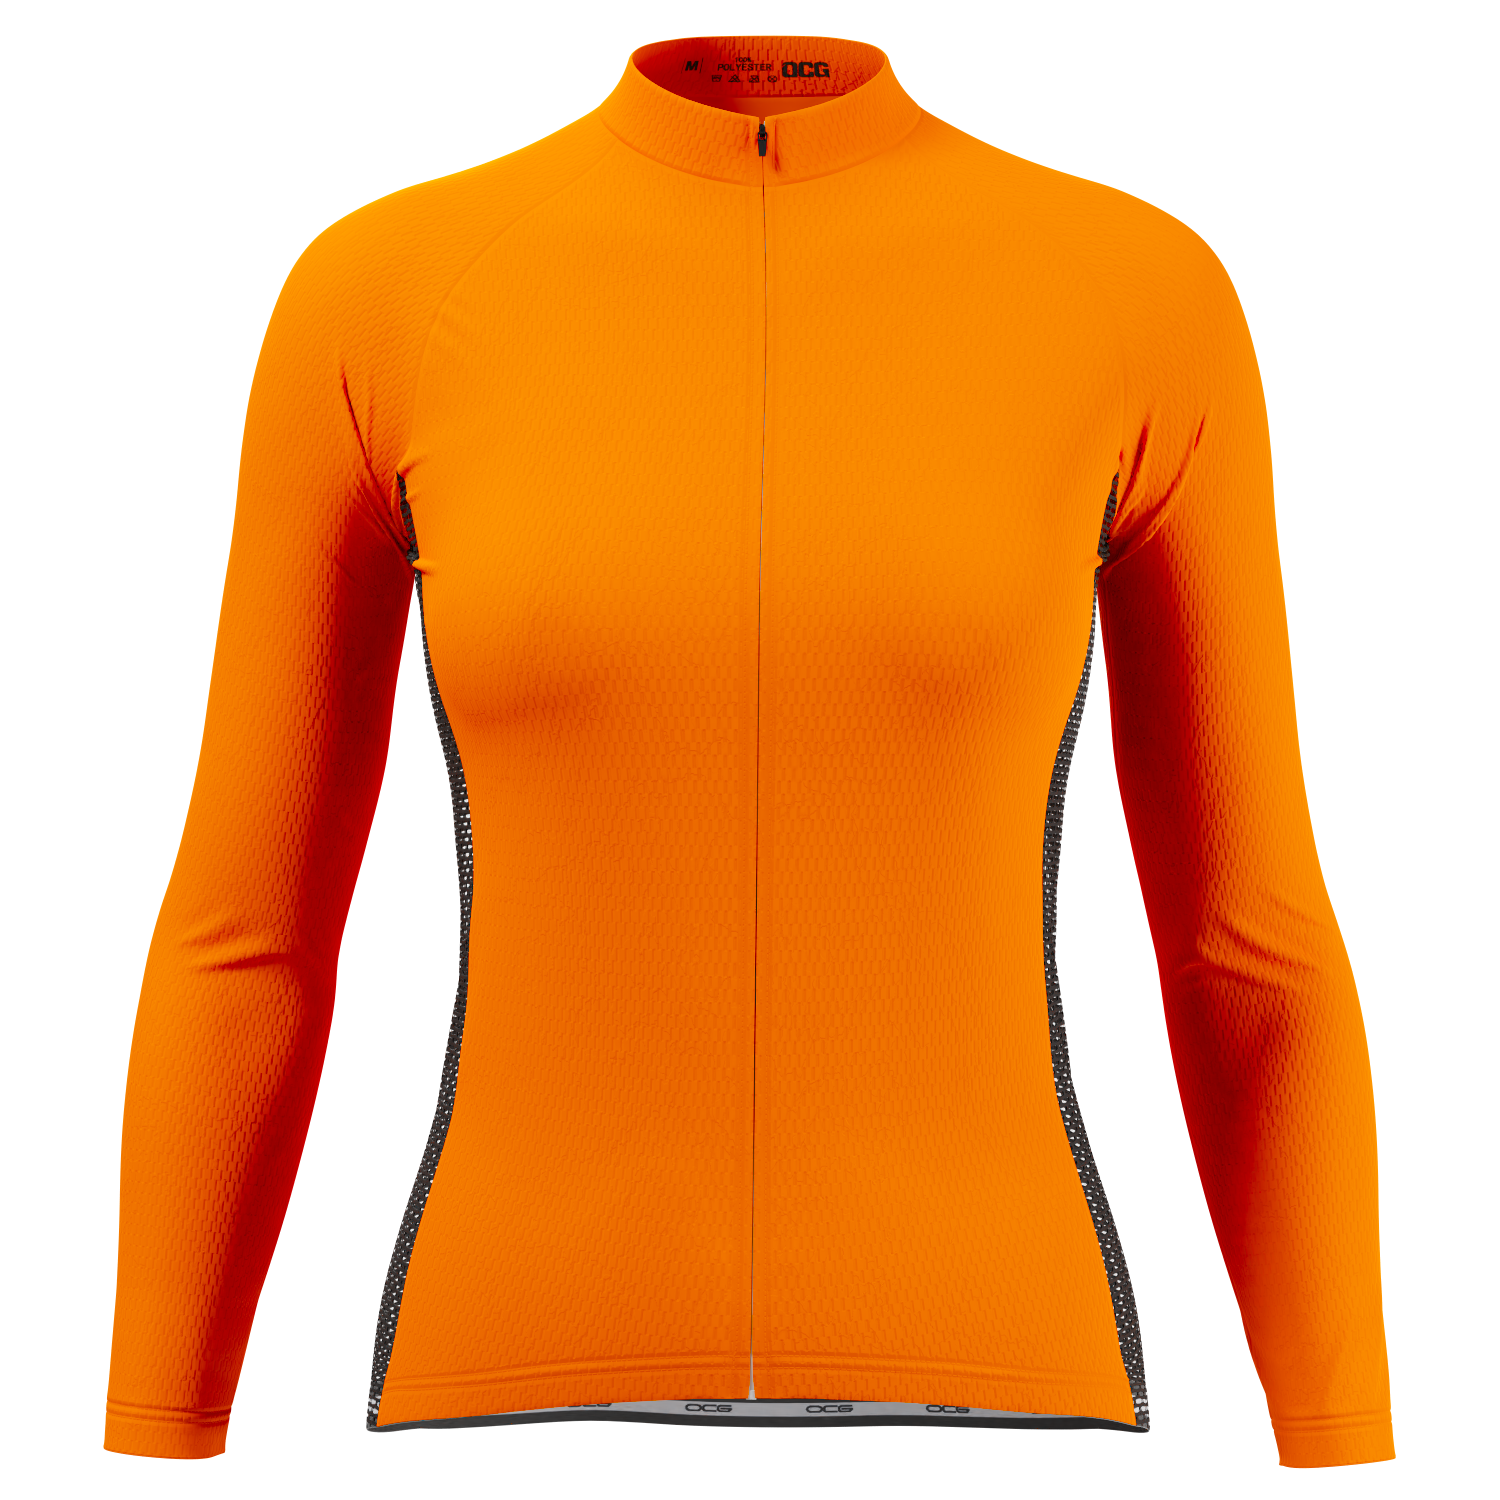 Women's Basic Colors Long Sleeve Cycling Jersey